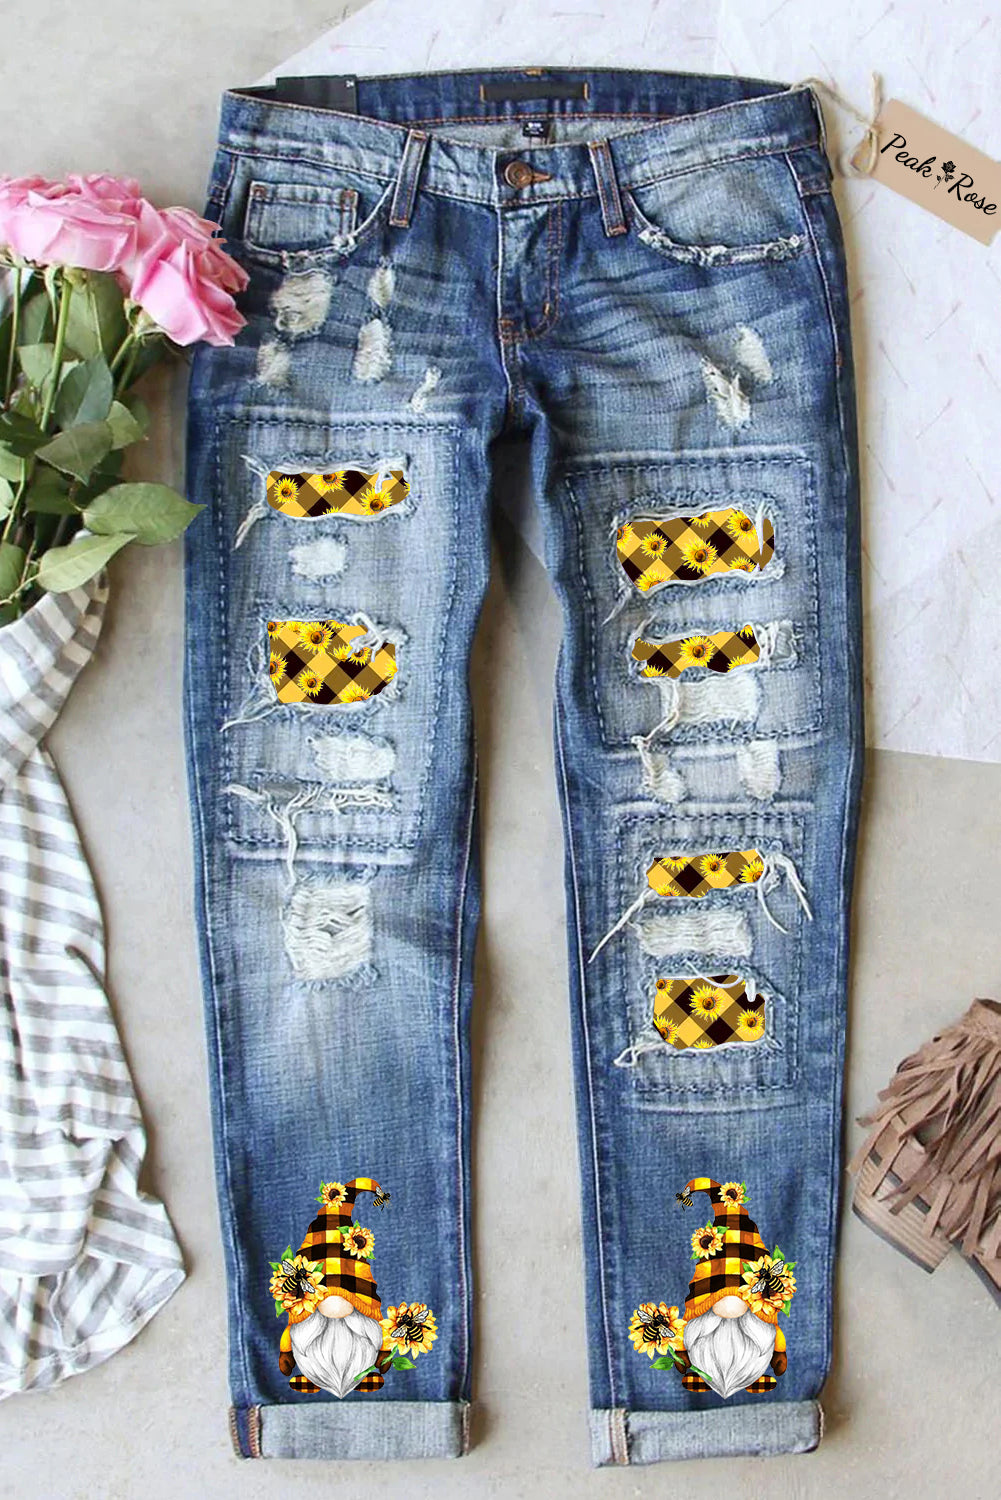 Western Gnomes With Bees And Sunflowers Plaid Print Denim Jeans